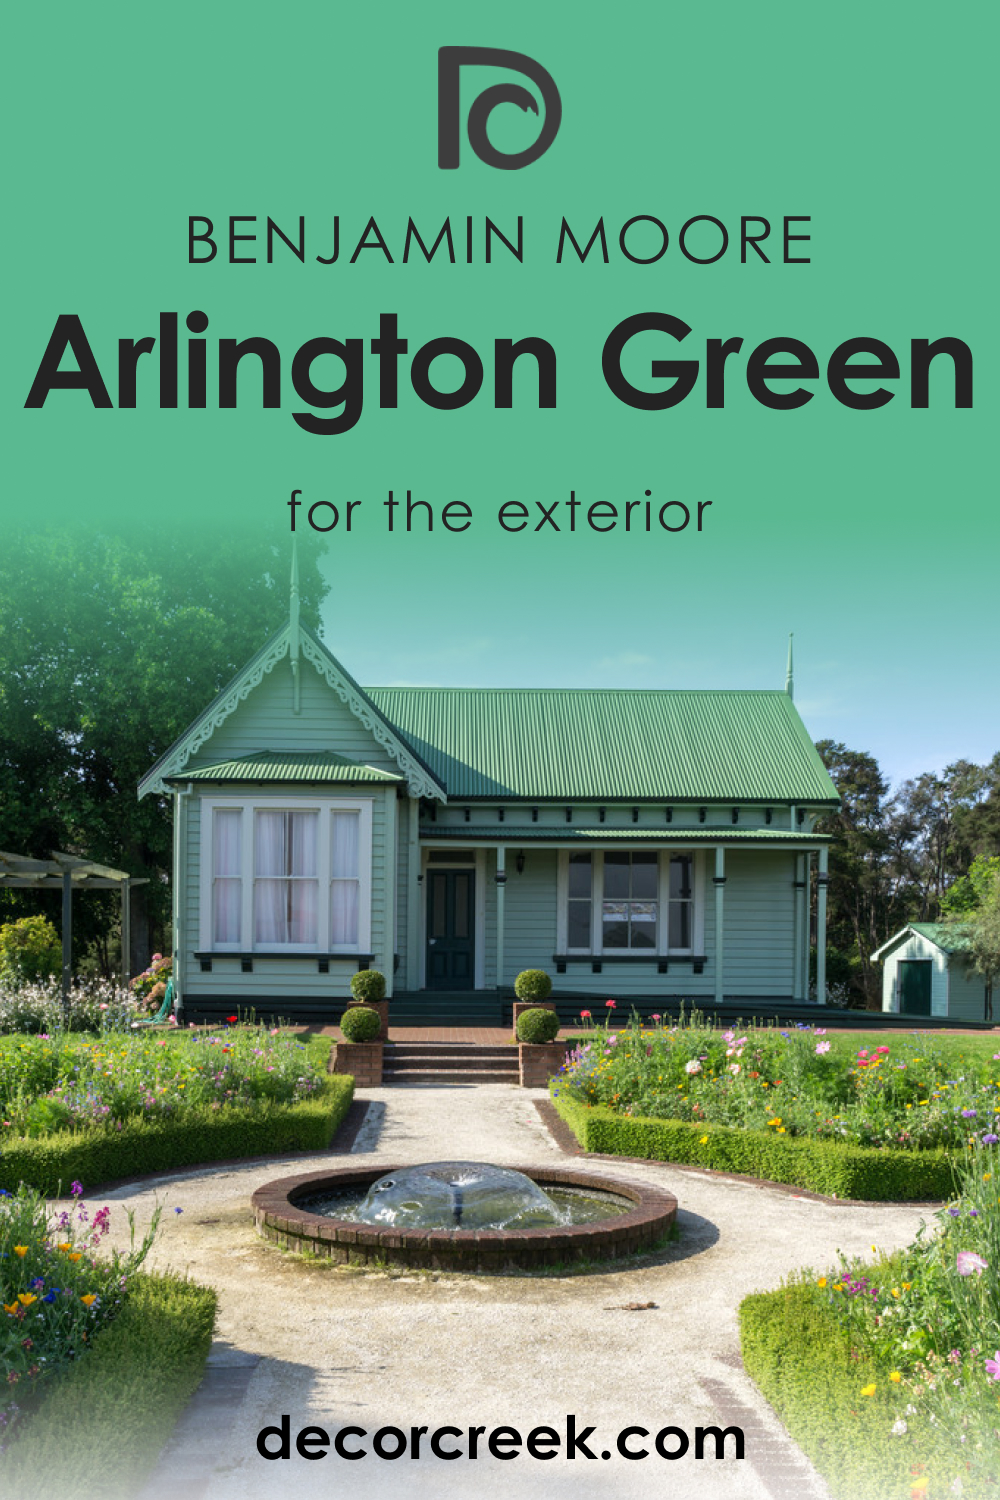 How to Use Arlington Green 580 for an Exterior?